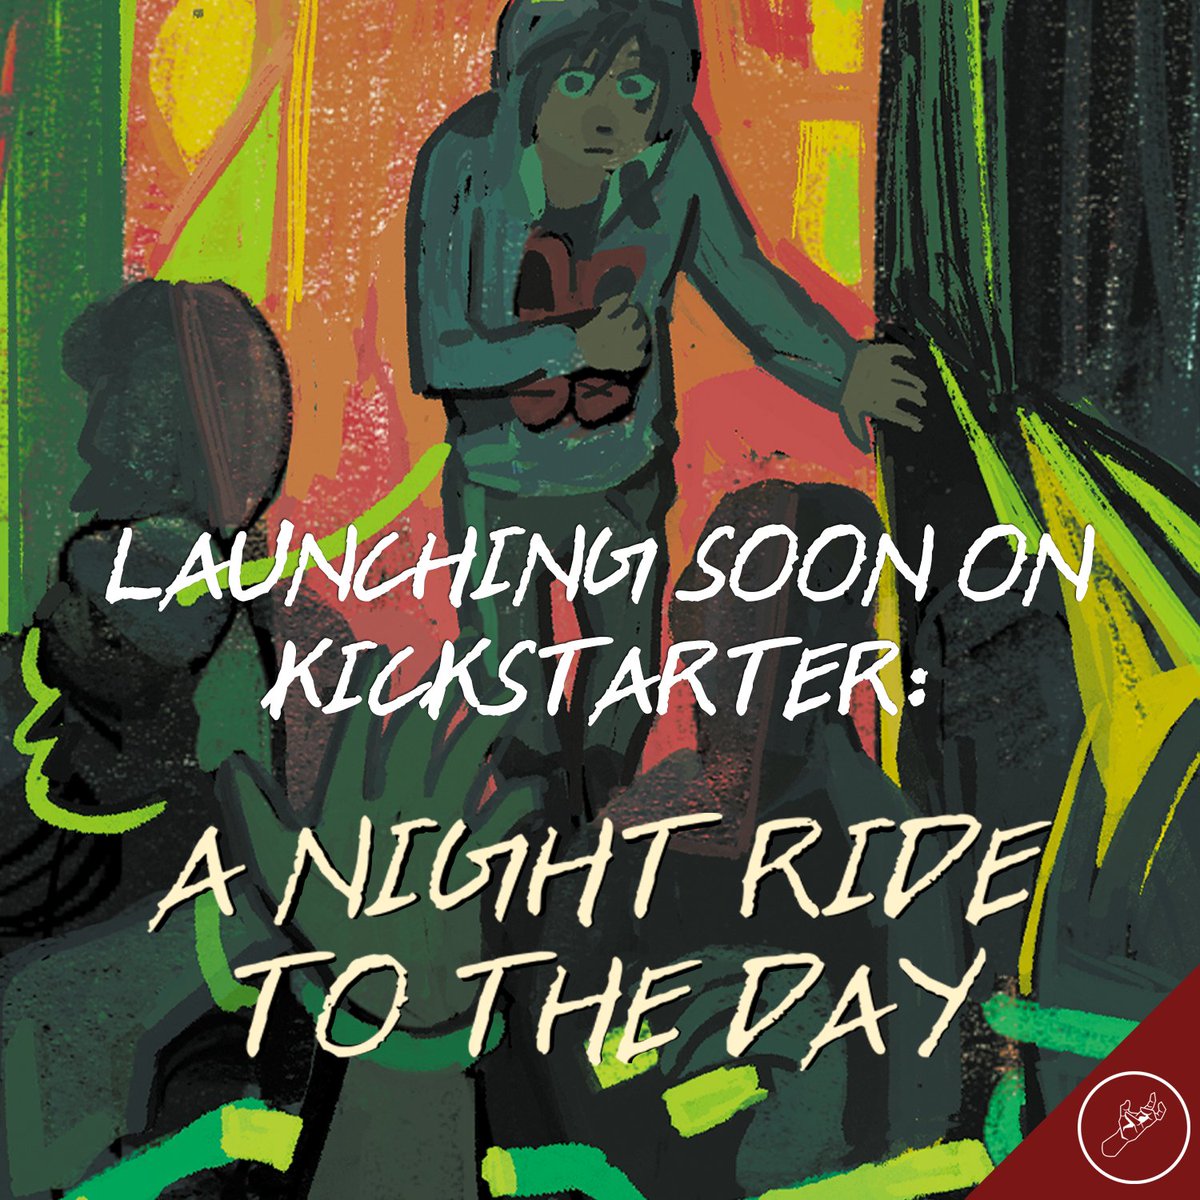 Coming later this week to @Kickstarter: a brand new Bulgilhan book by the name of 'A NIGHT RIDE TO THE DAY'! Get notified when our 2024 Fall campaign goes live: kickstarter.com/projects/bulgi…